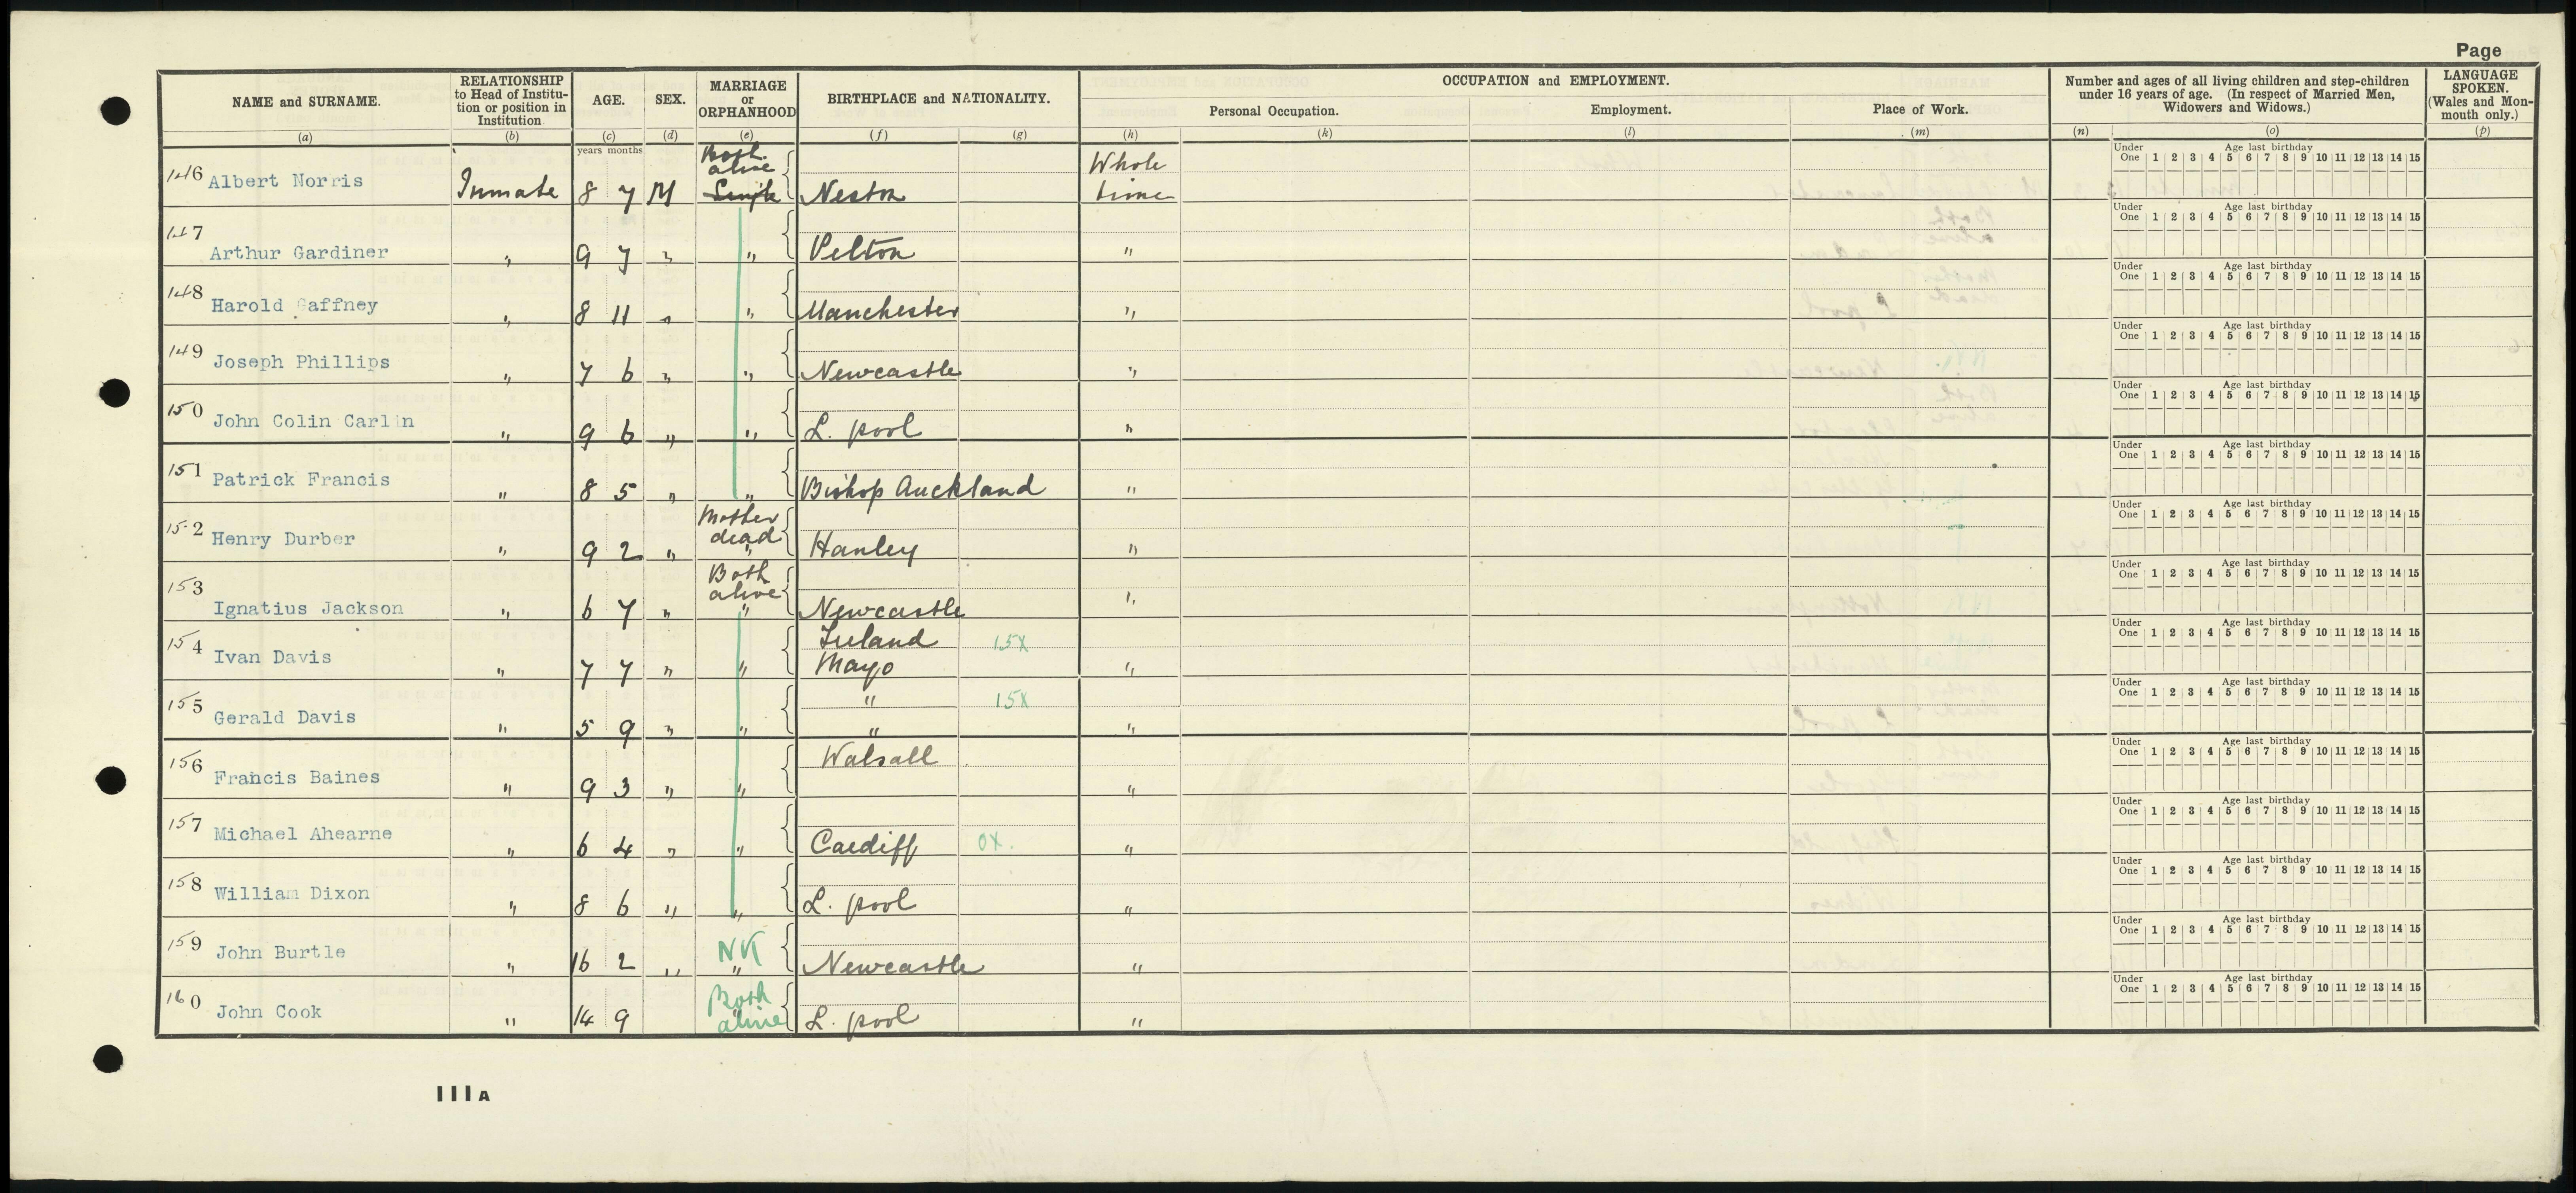 A Census record from St John's Institution, Clifford.